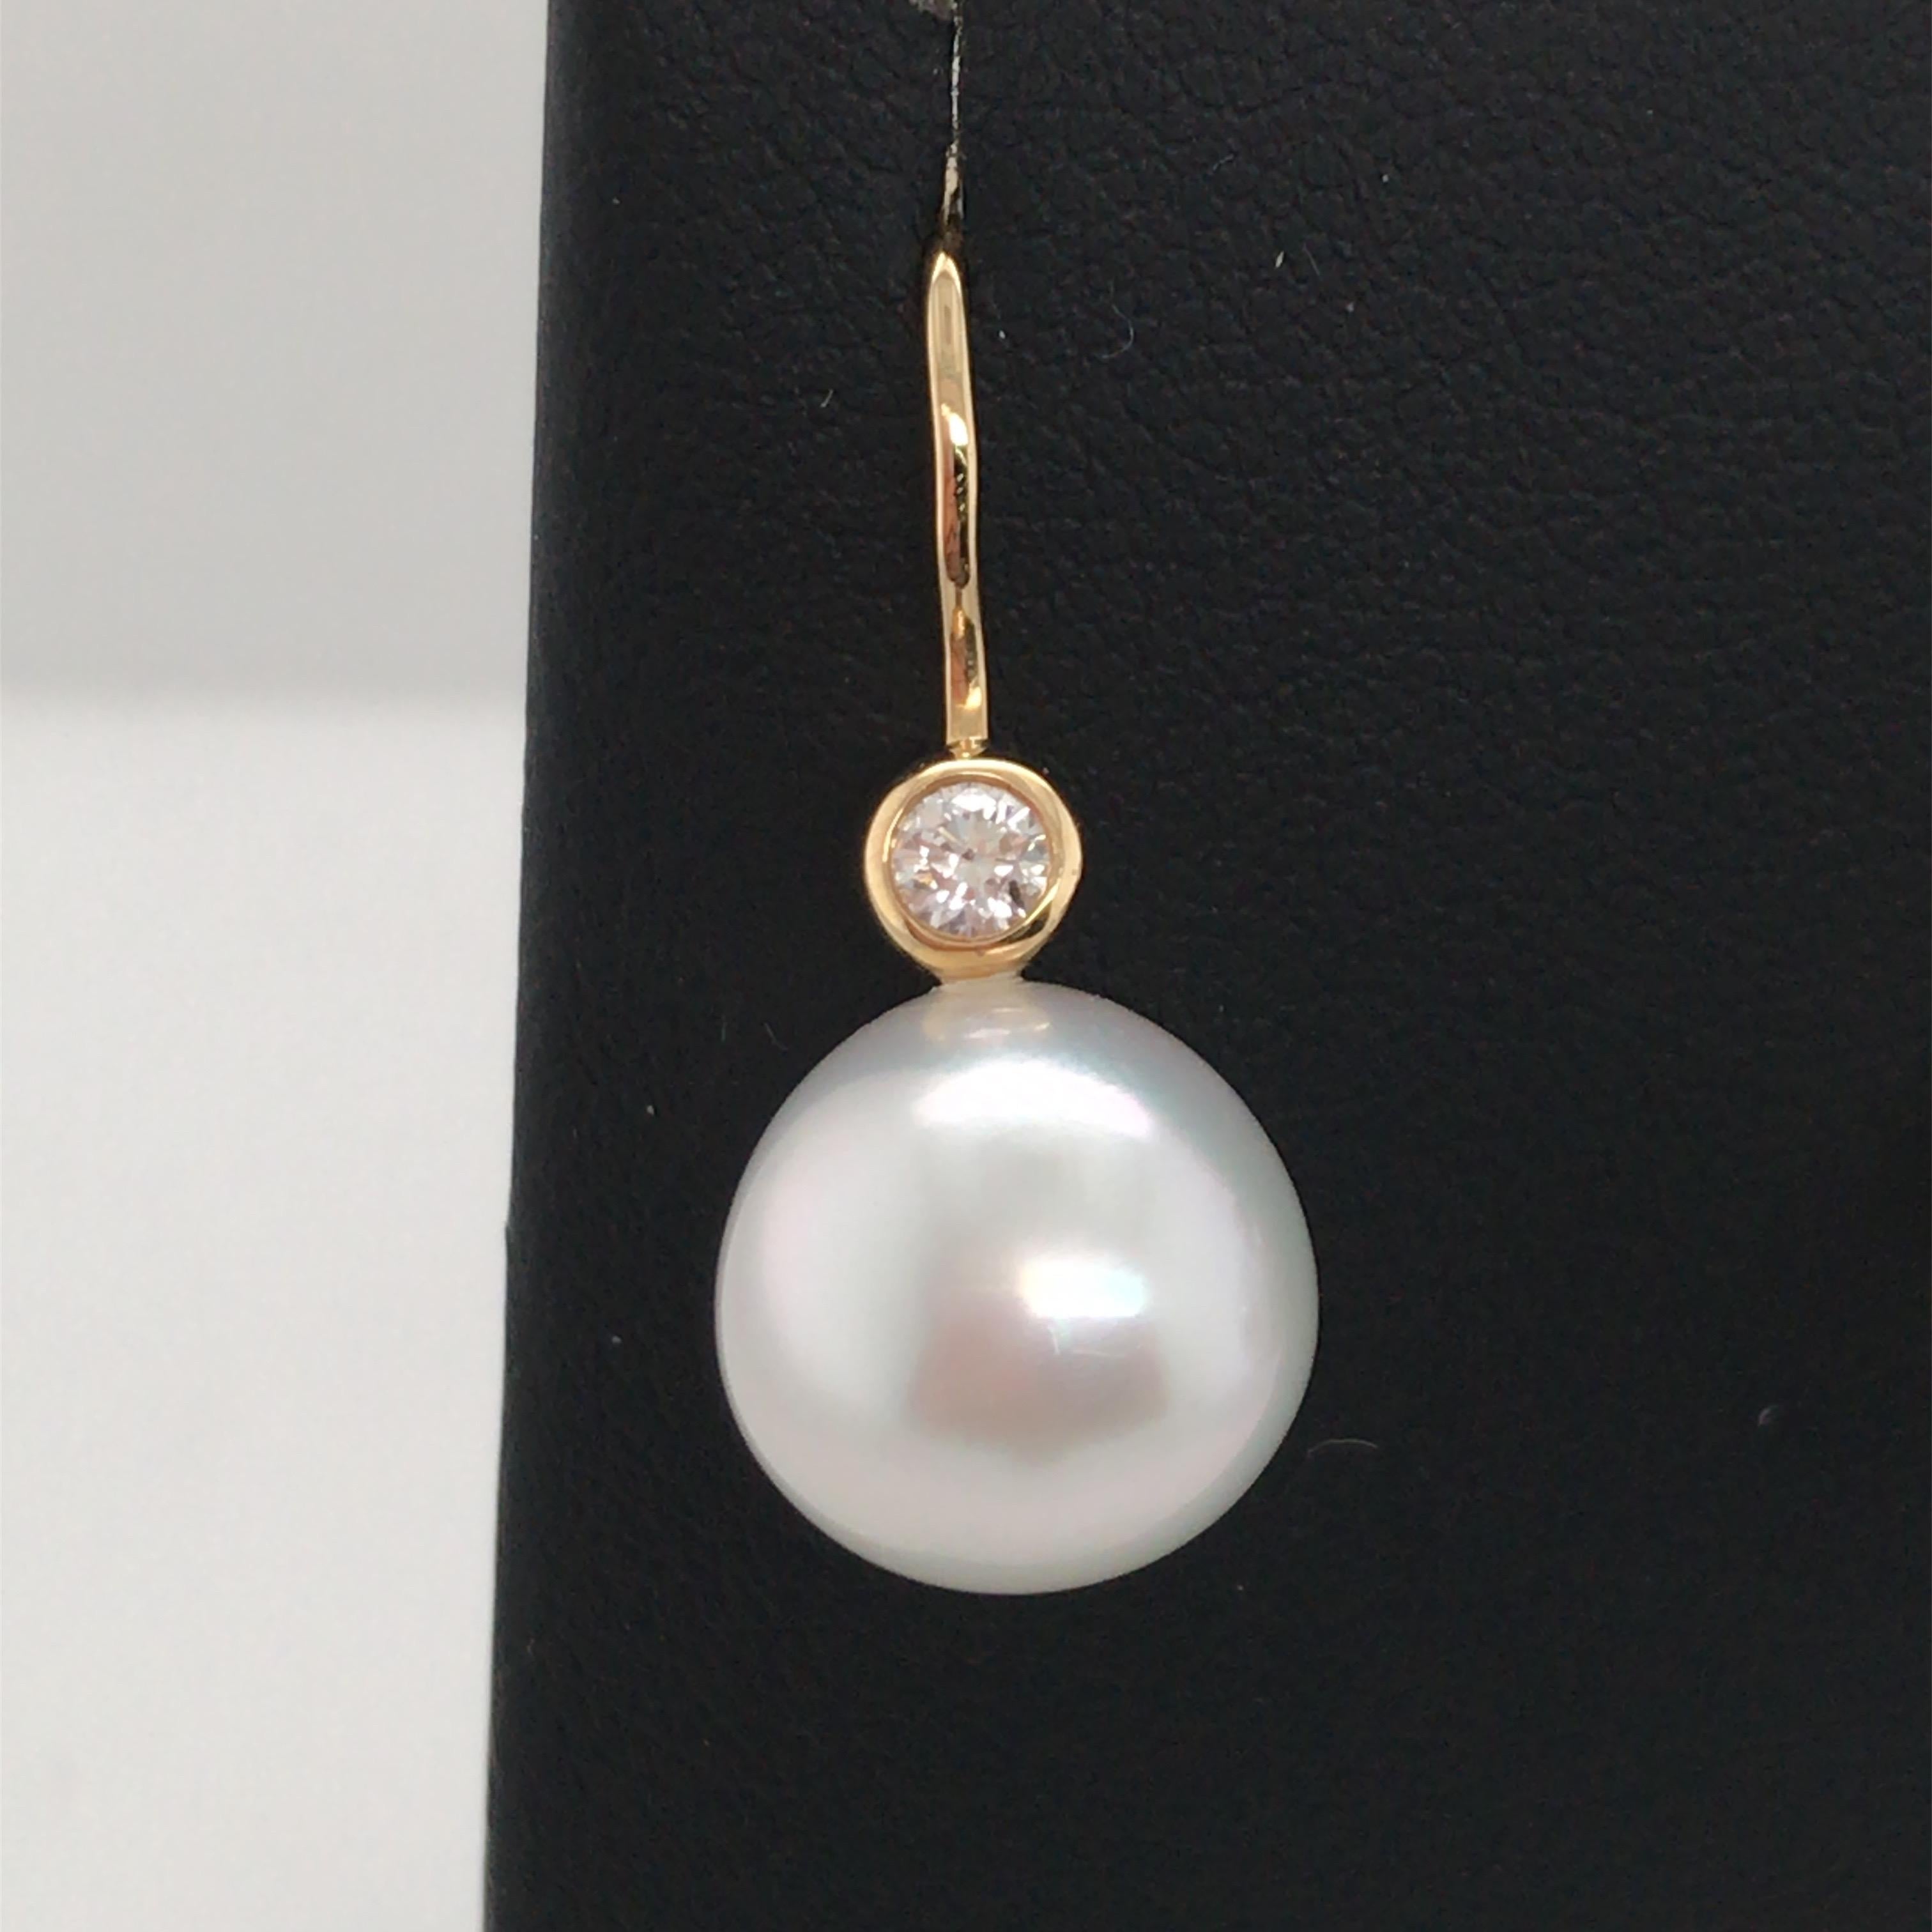 18K Yellow gold drop earring featuring two South Sea Pearls measuring 11-12 mm and two round brilliants weighing 0.20 carats in a bezel setting.
Color G-H
Clarity SI